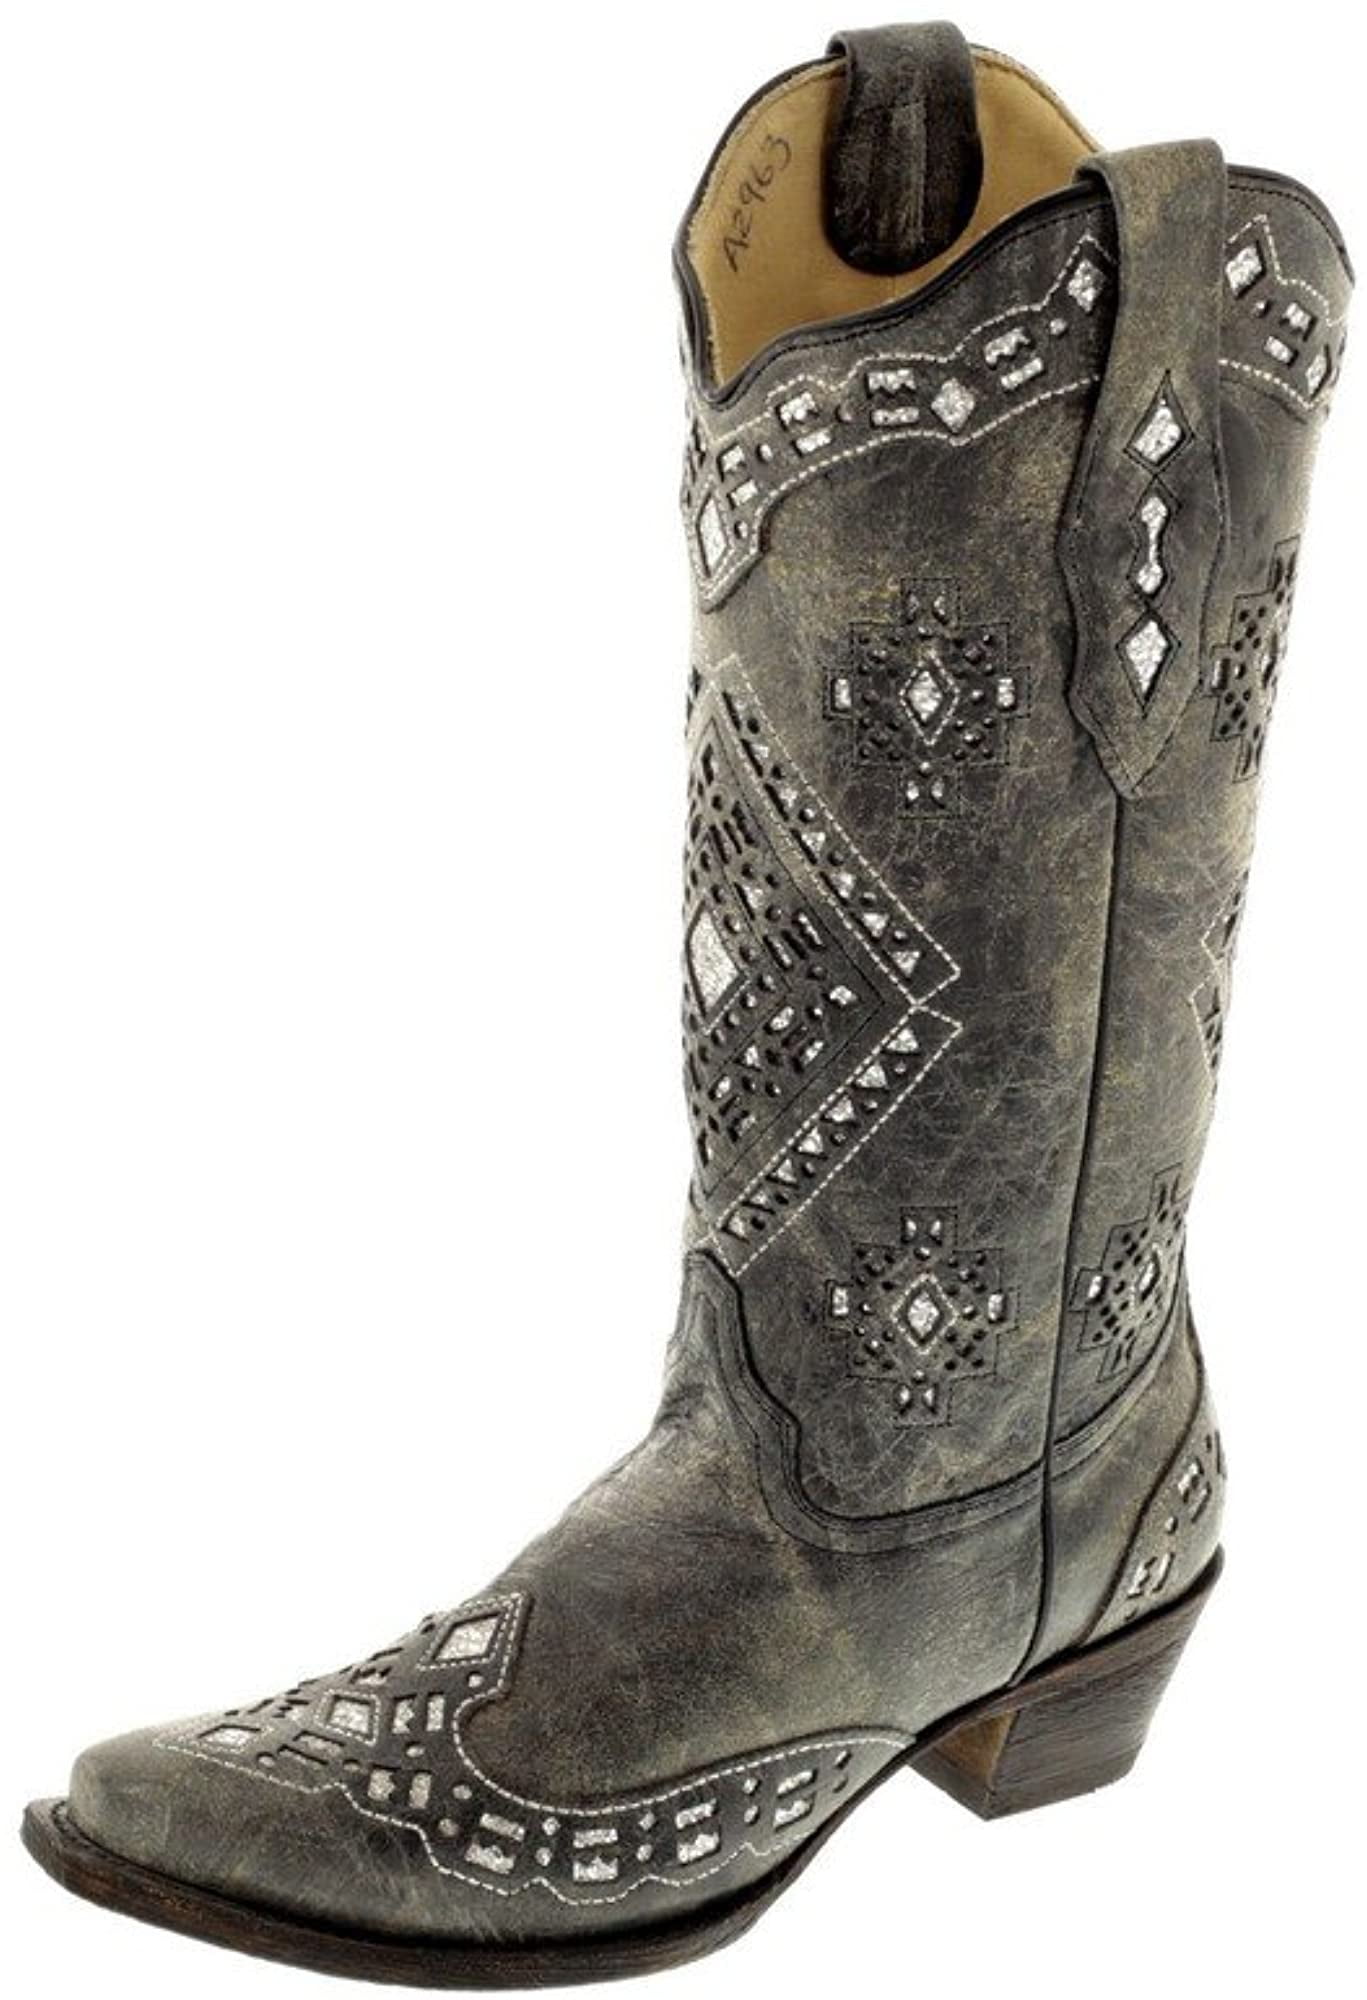 Corral Womens Sparkling Glitter Inlay Black/Silver Cowboy Boots